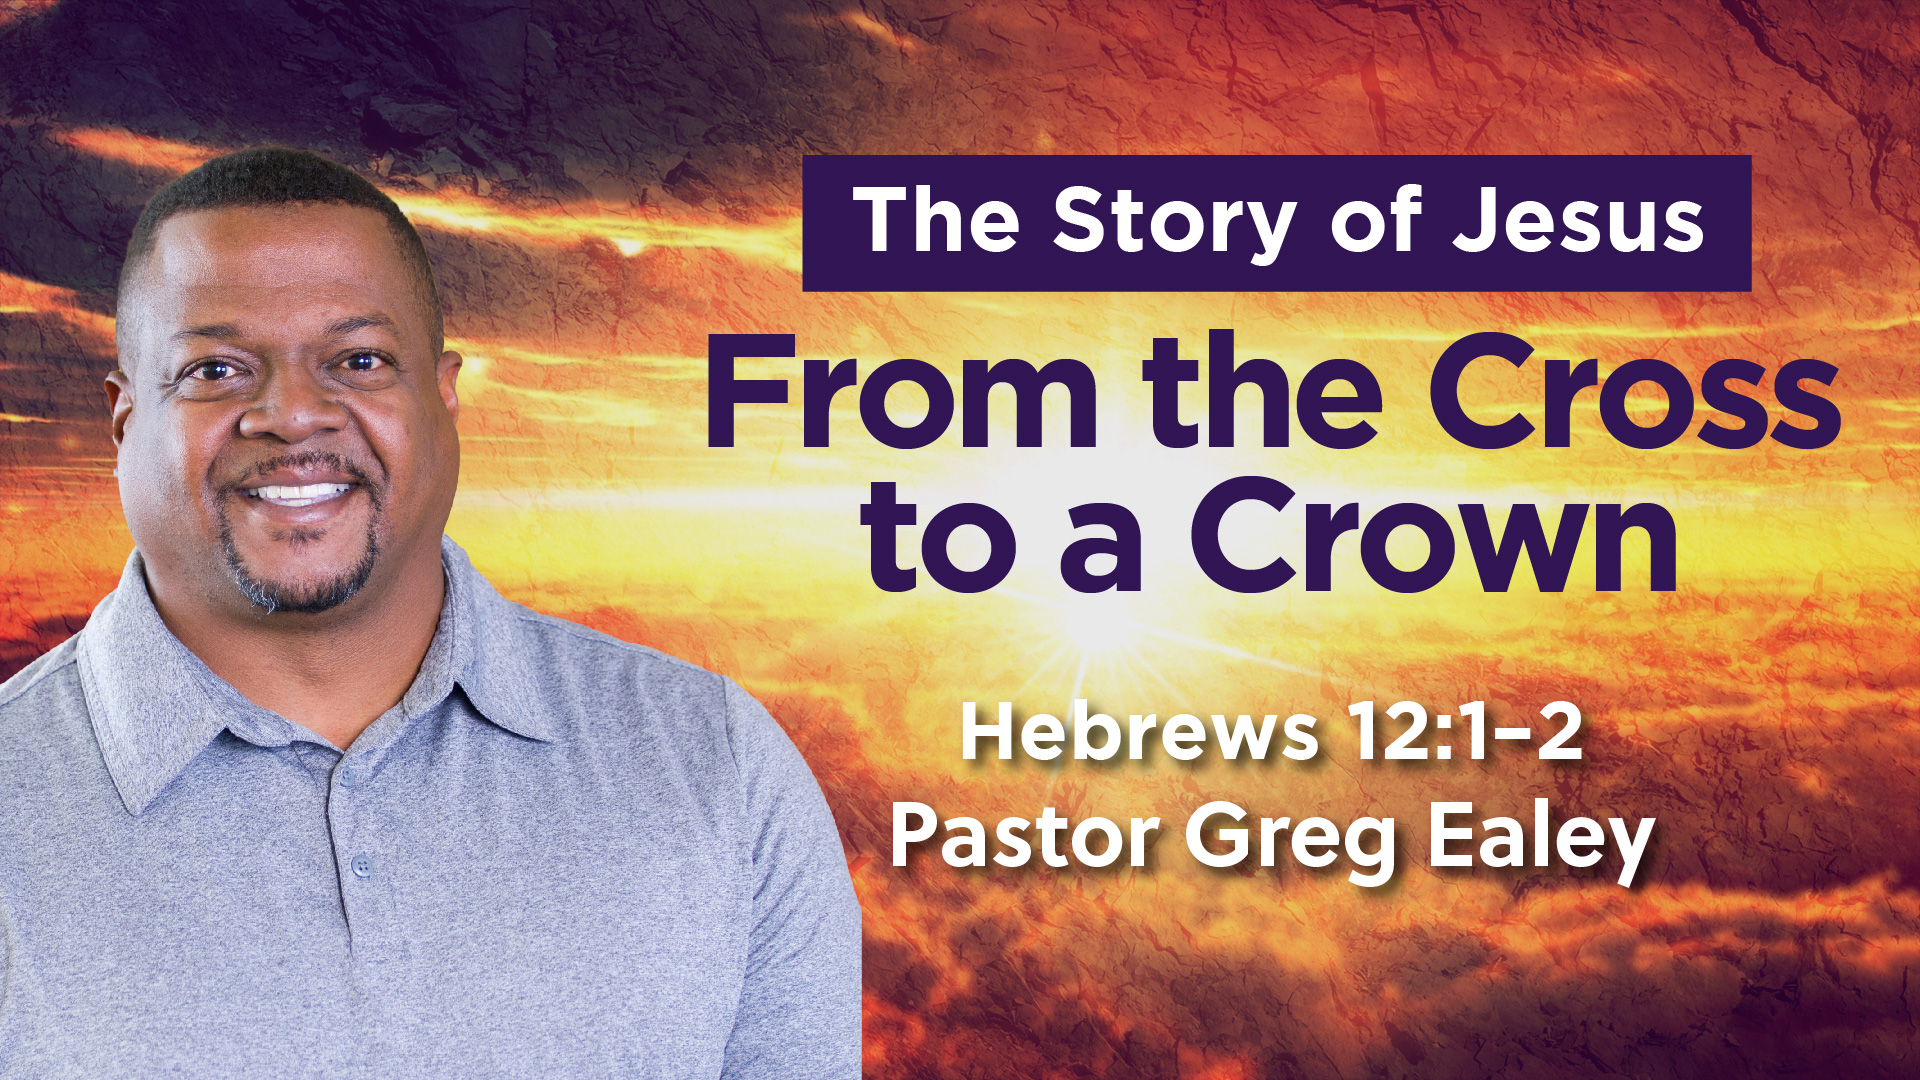 The Story of Jesus - From the Cross to a Crown